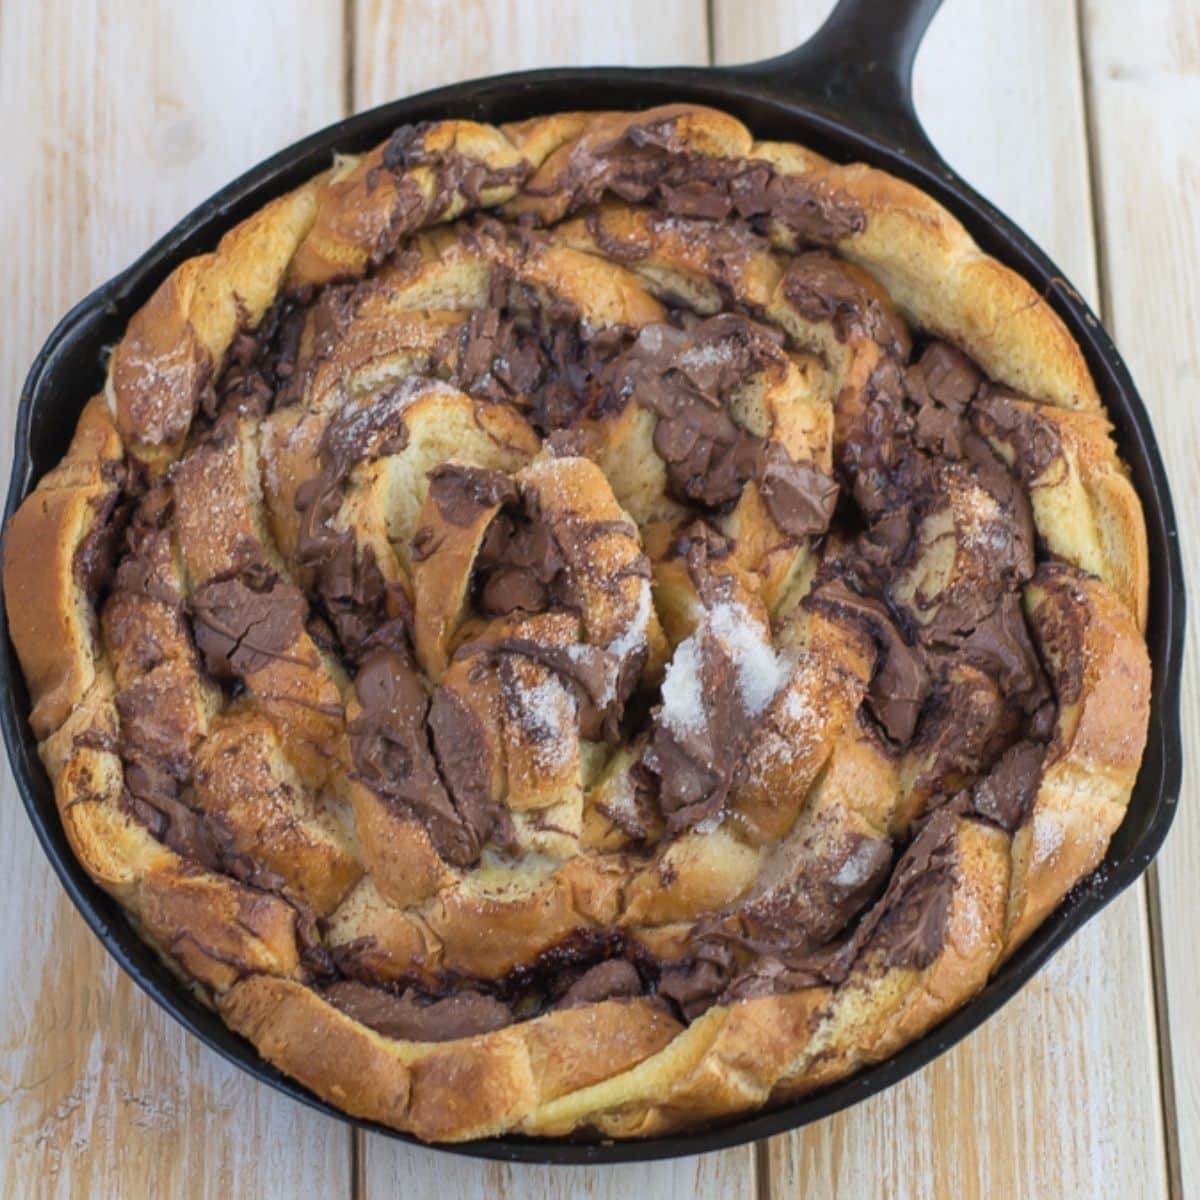 Nutella French Toast Casserole in a cast iron skillet.